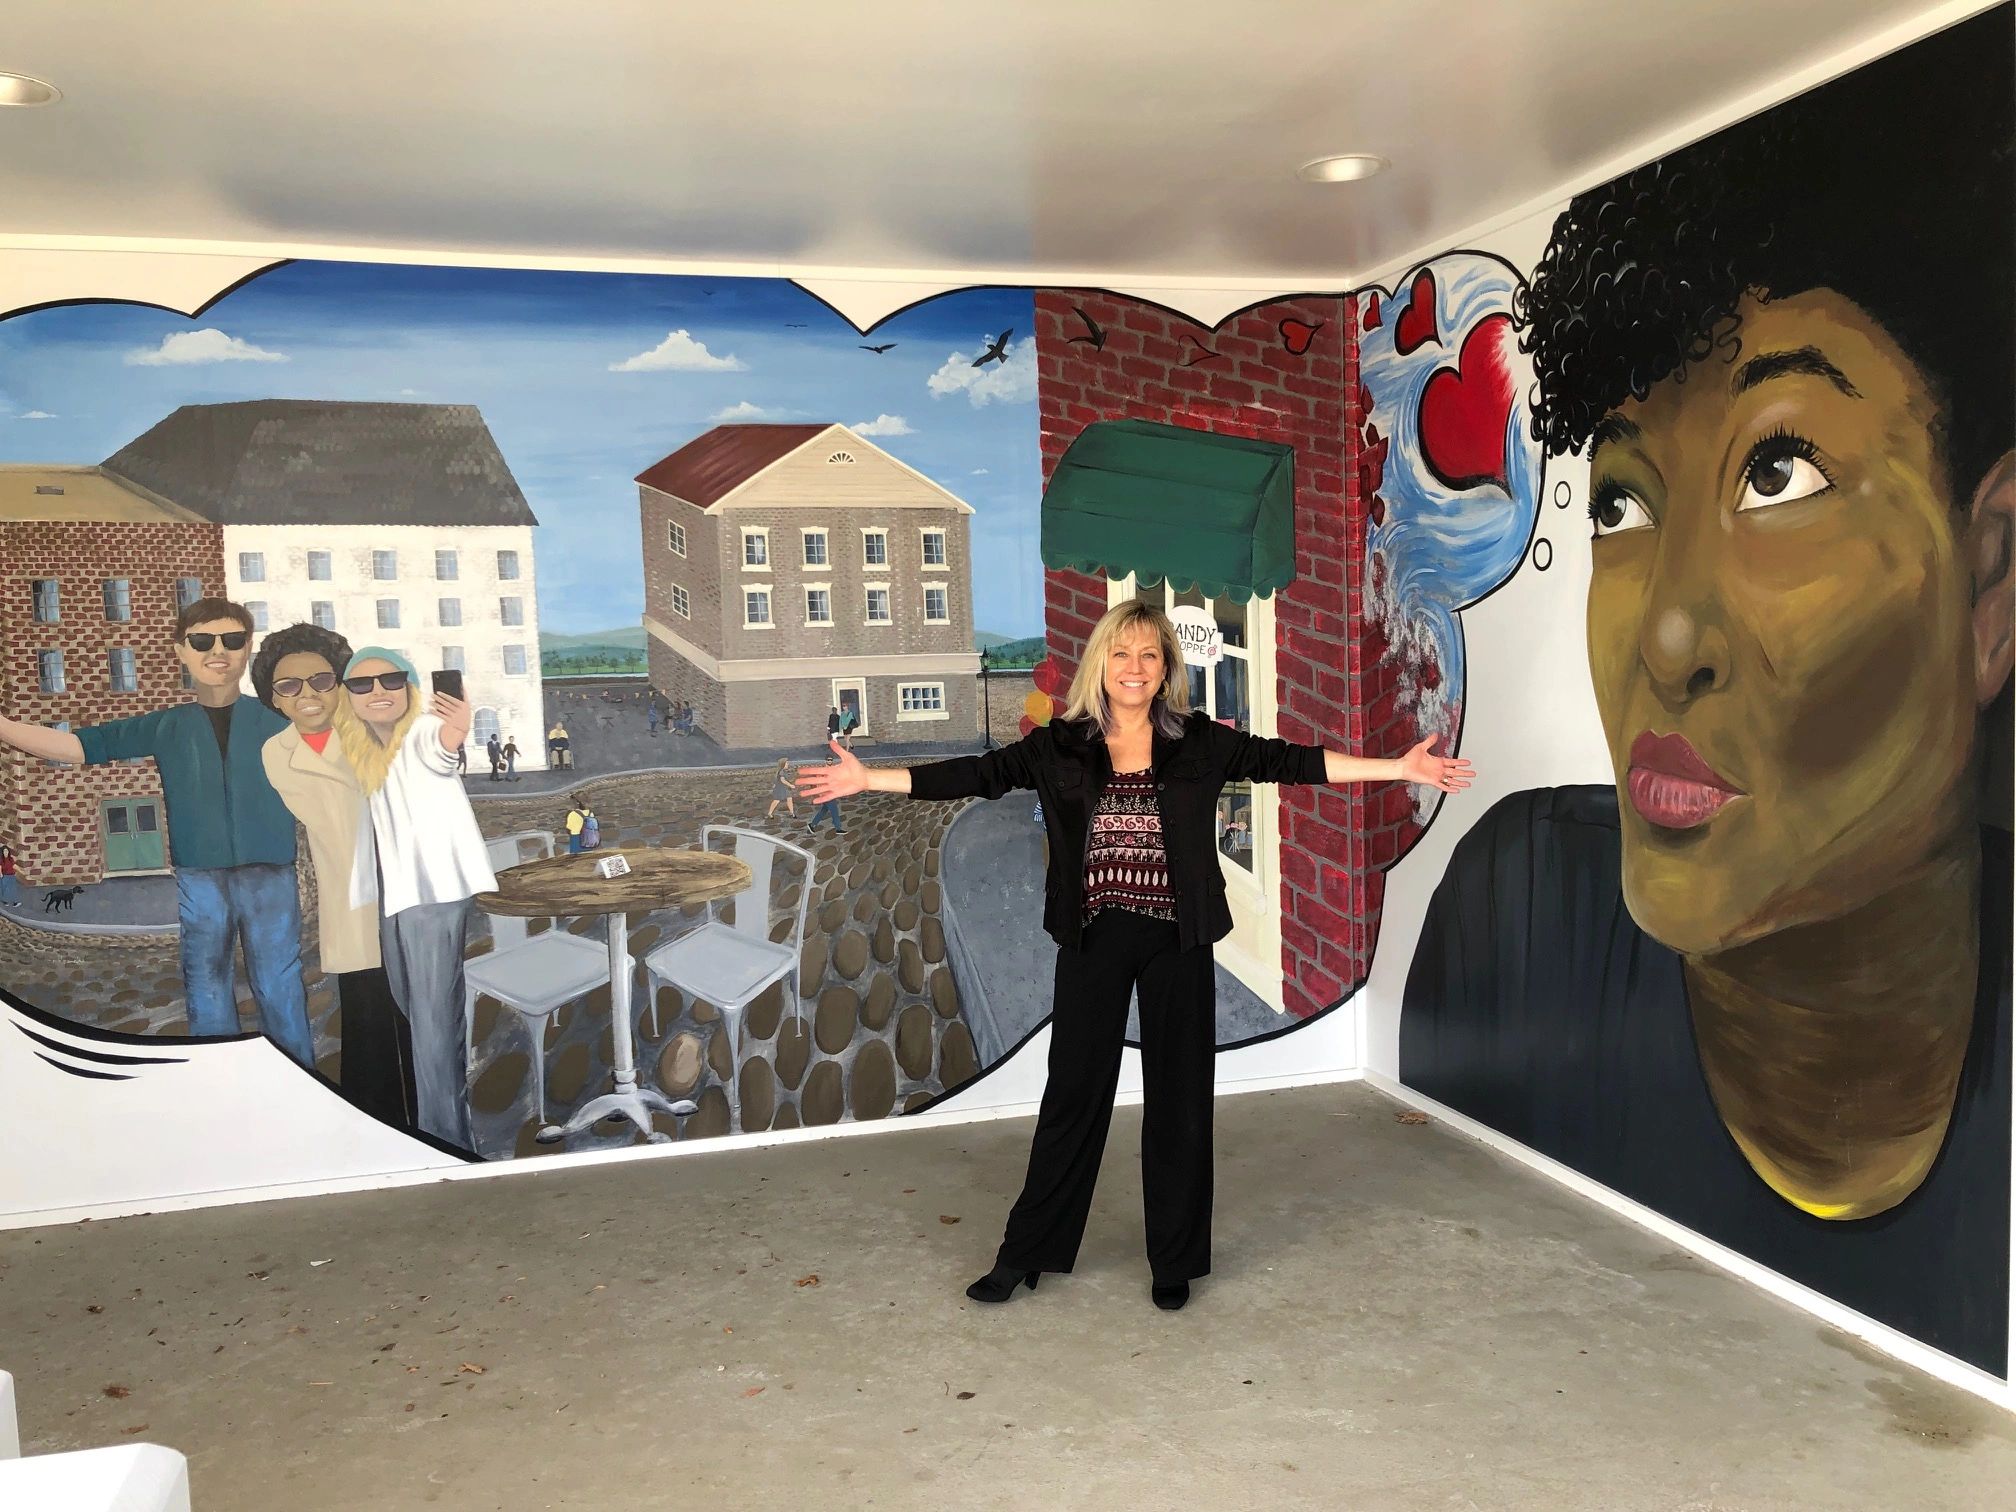 Kelly standing in front of a public mural she painted in Virginia, USA.